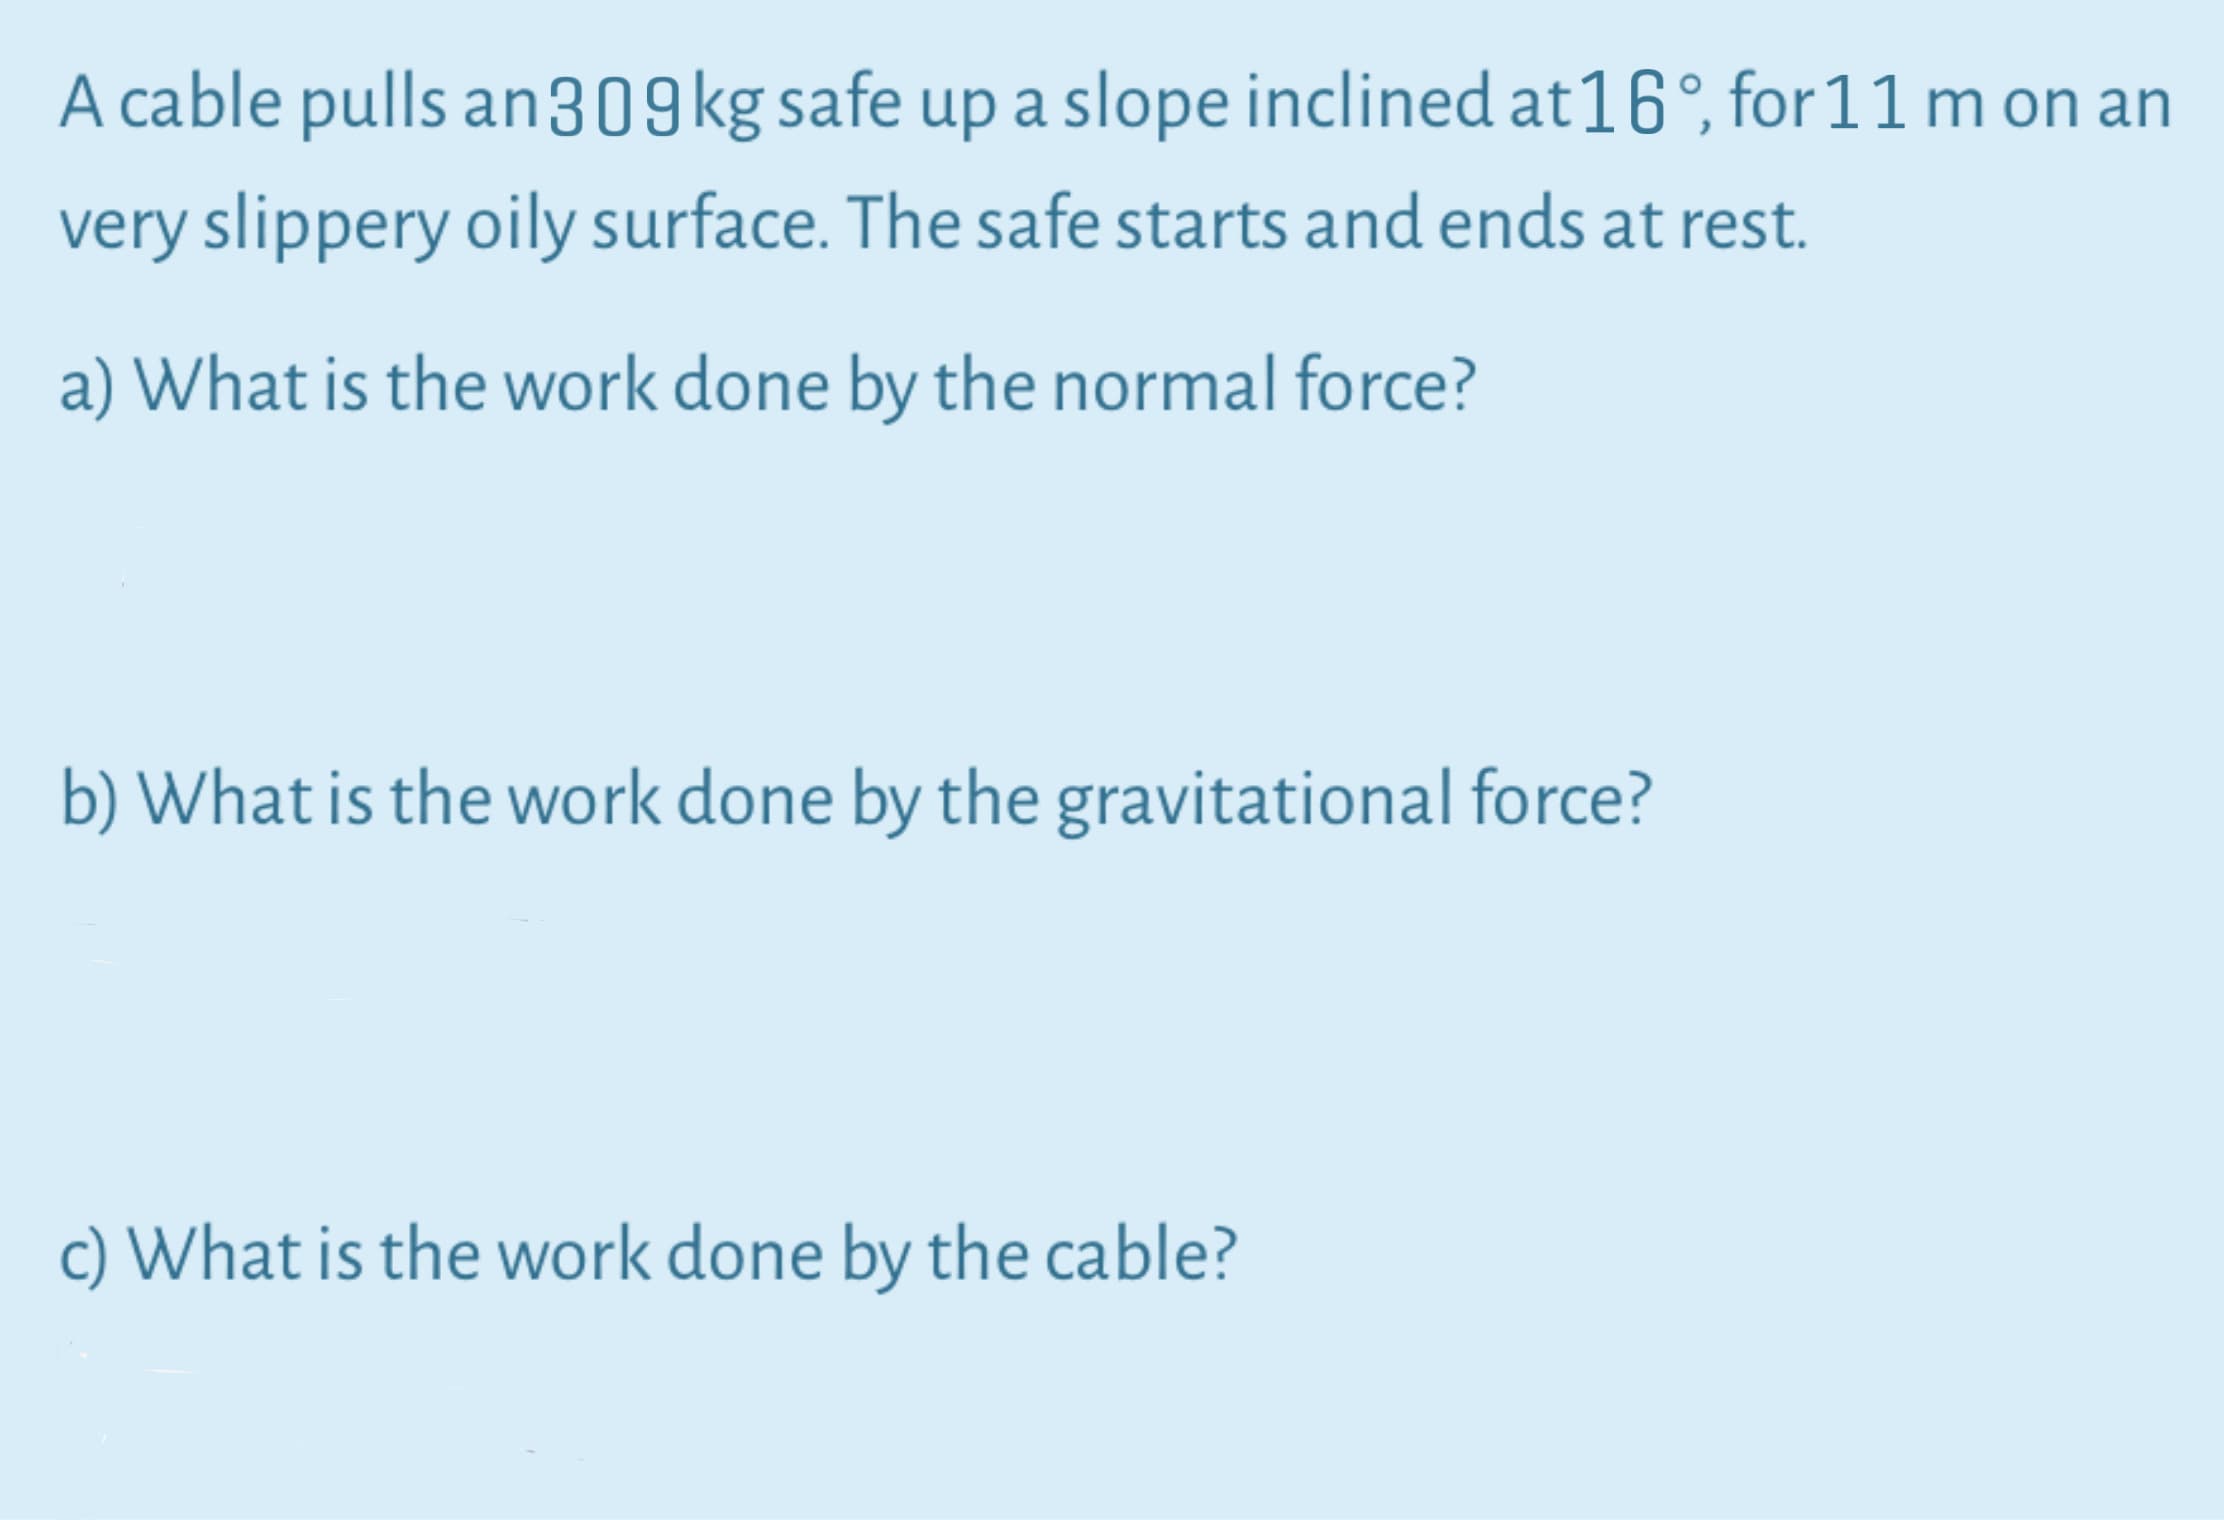 A cable pulls an309kg safe up a slope inclined at16°, for 11 m on an
very slippery oily surface. The safe starts and ends at rest.
a) What is the work done by the normal force?
b) What is the work done by the gravitational force?
c) What is the work done by the cable?
